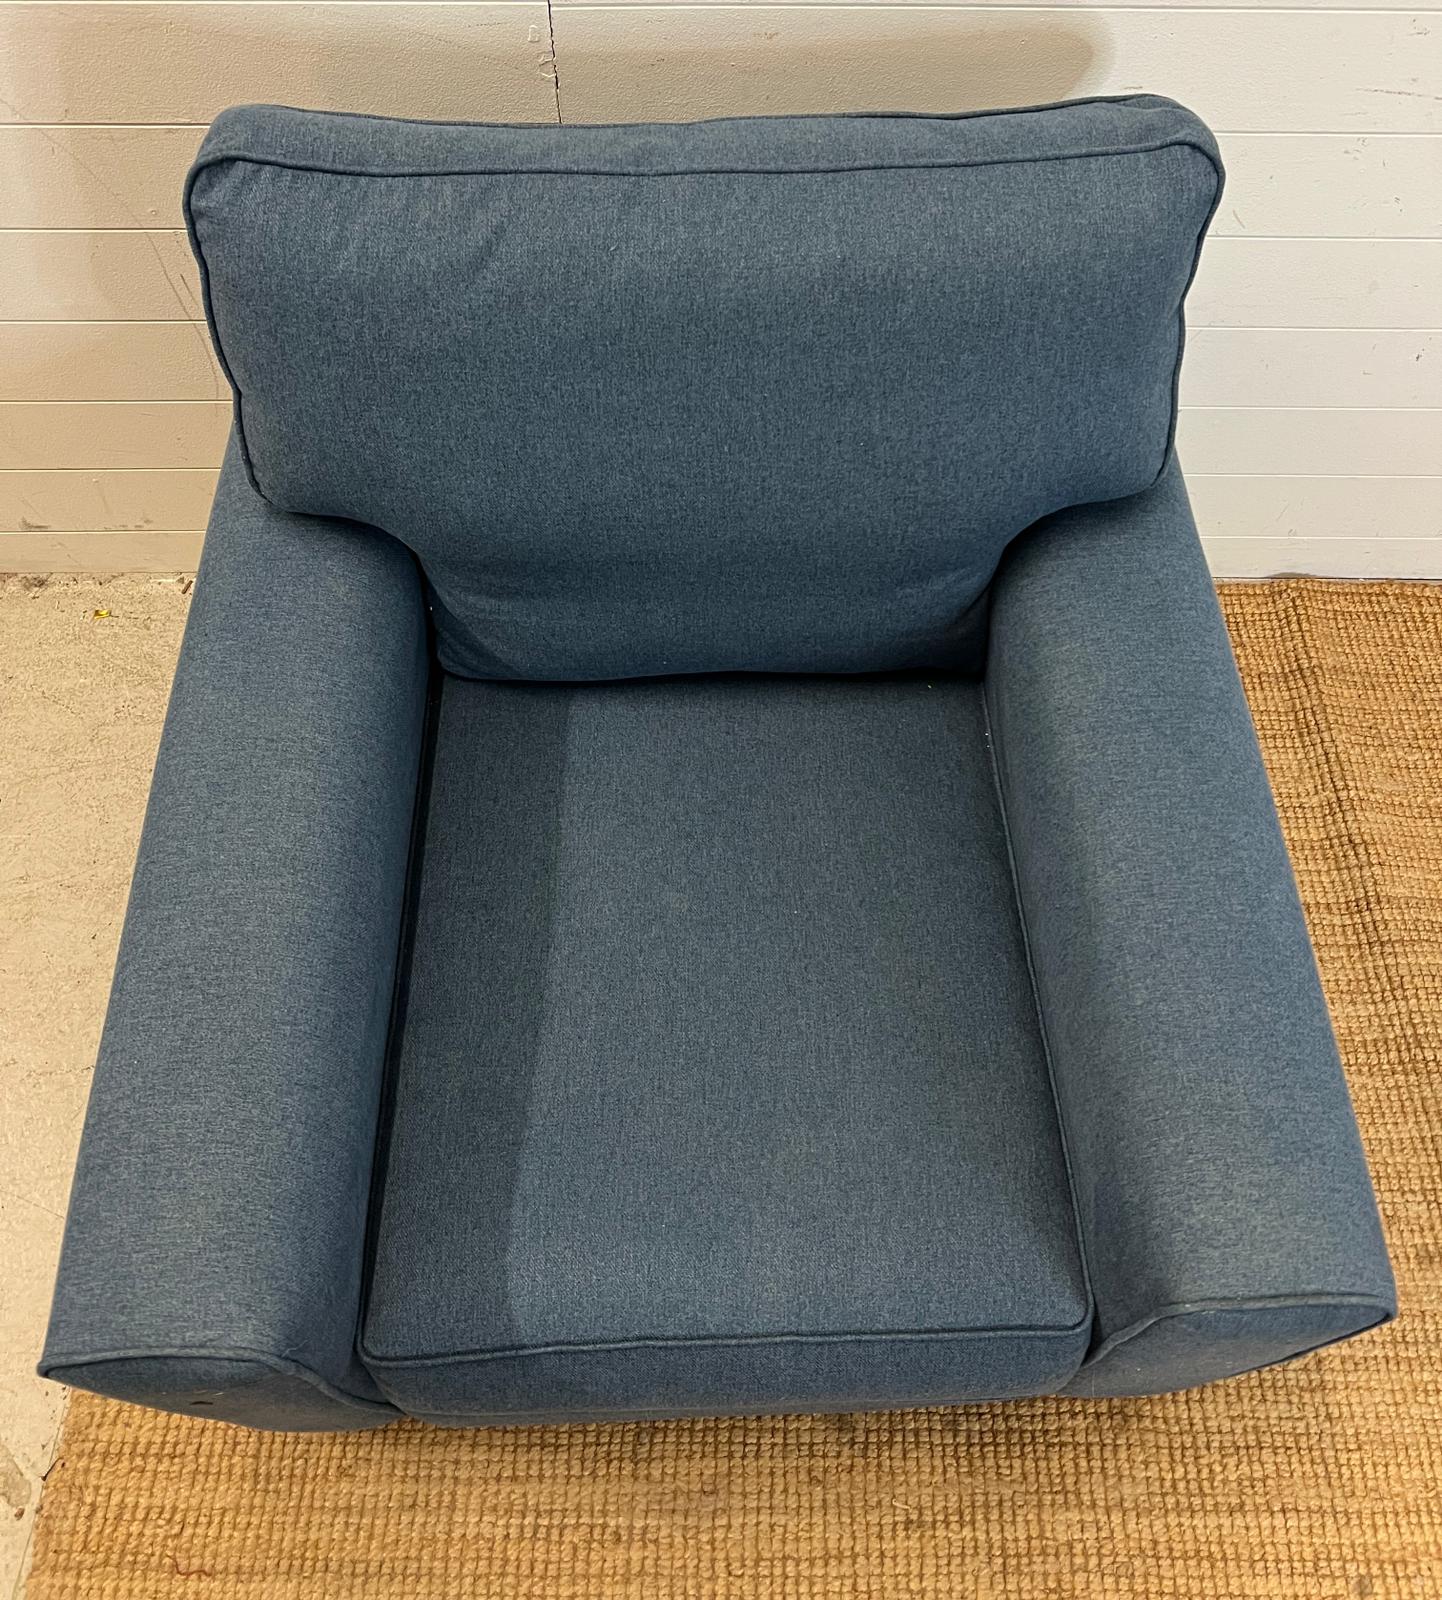 A blue arm chair by Thorngate - Image 4 of 4